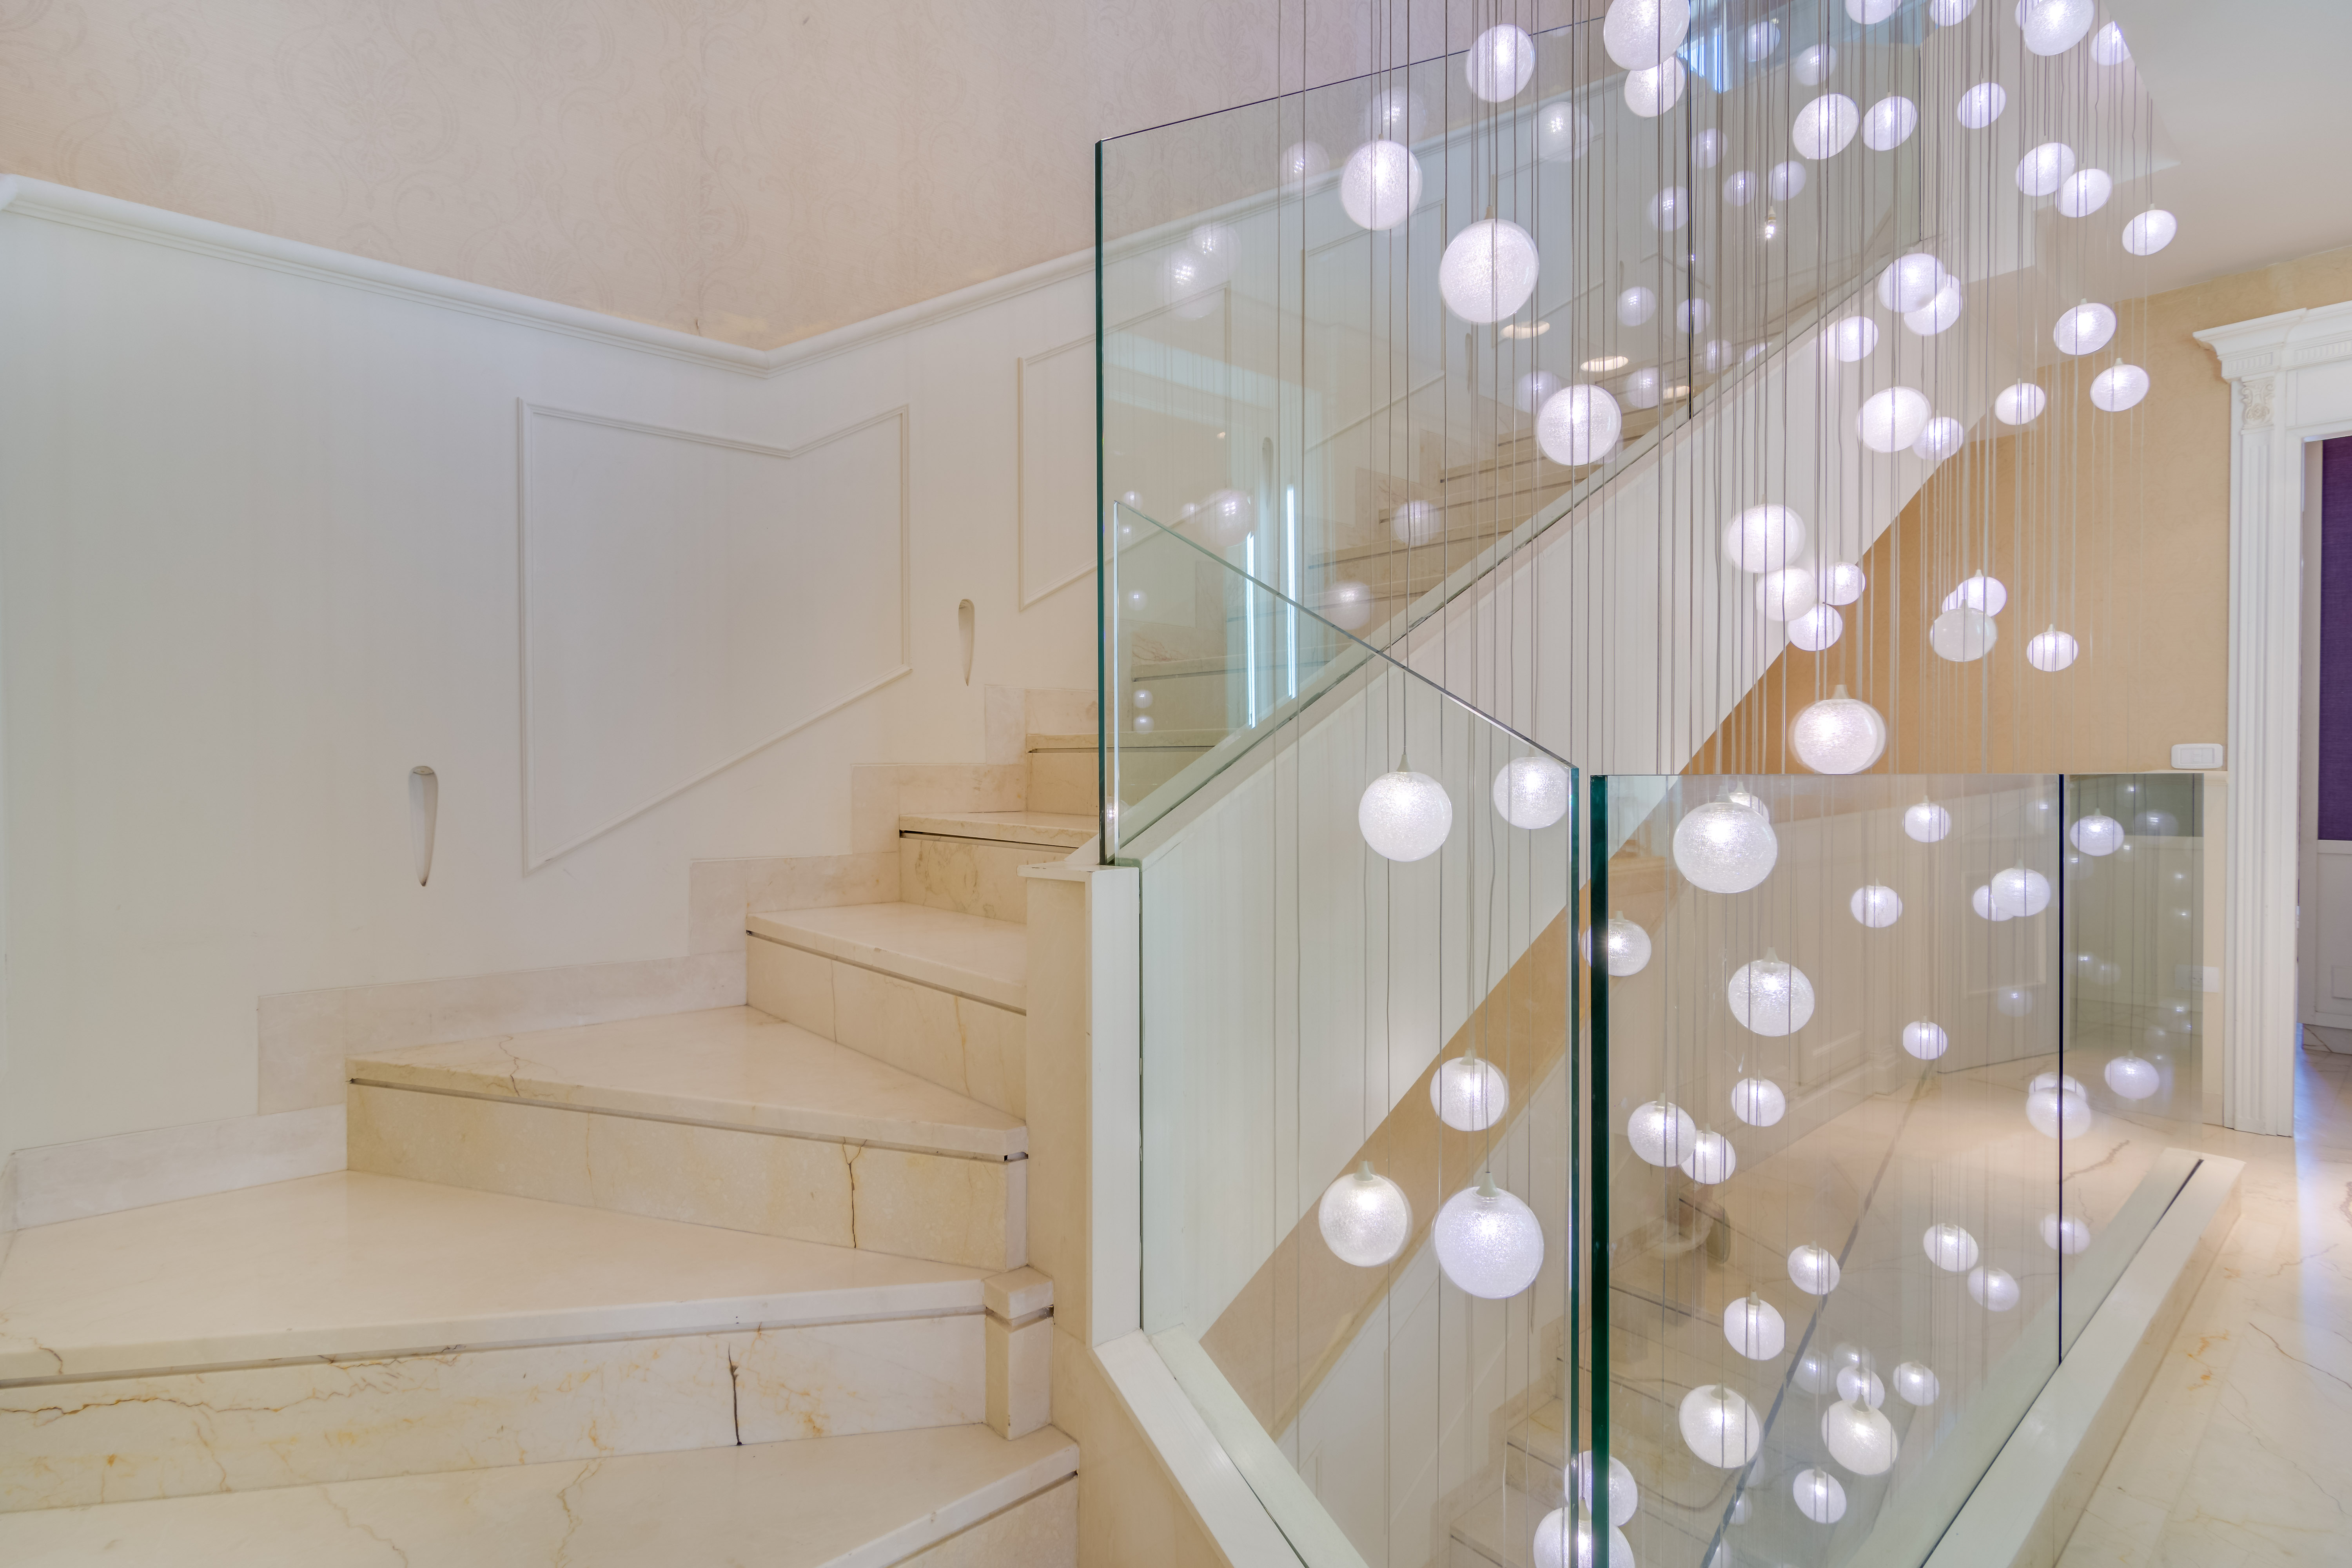 Staircase between all floors with beautiful lights!